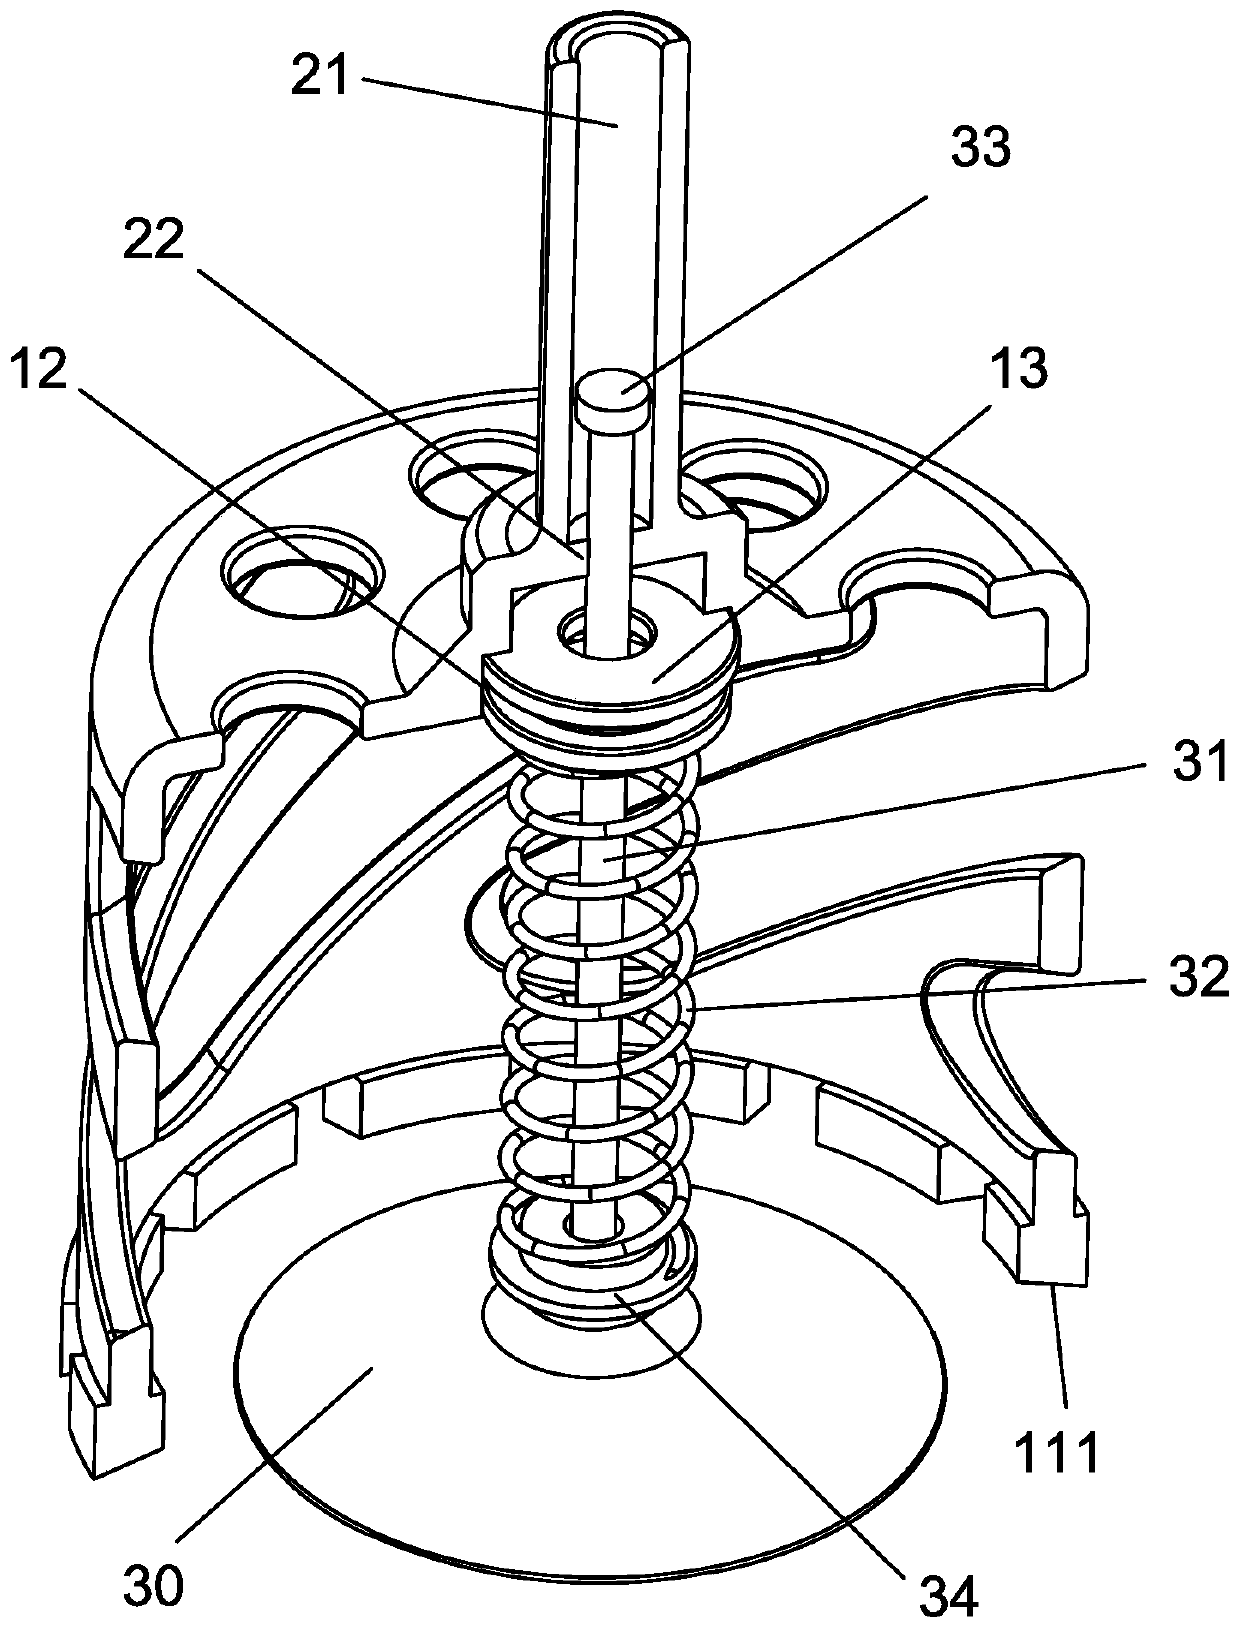 Double-layer glass trepanning device